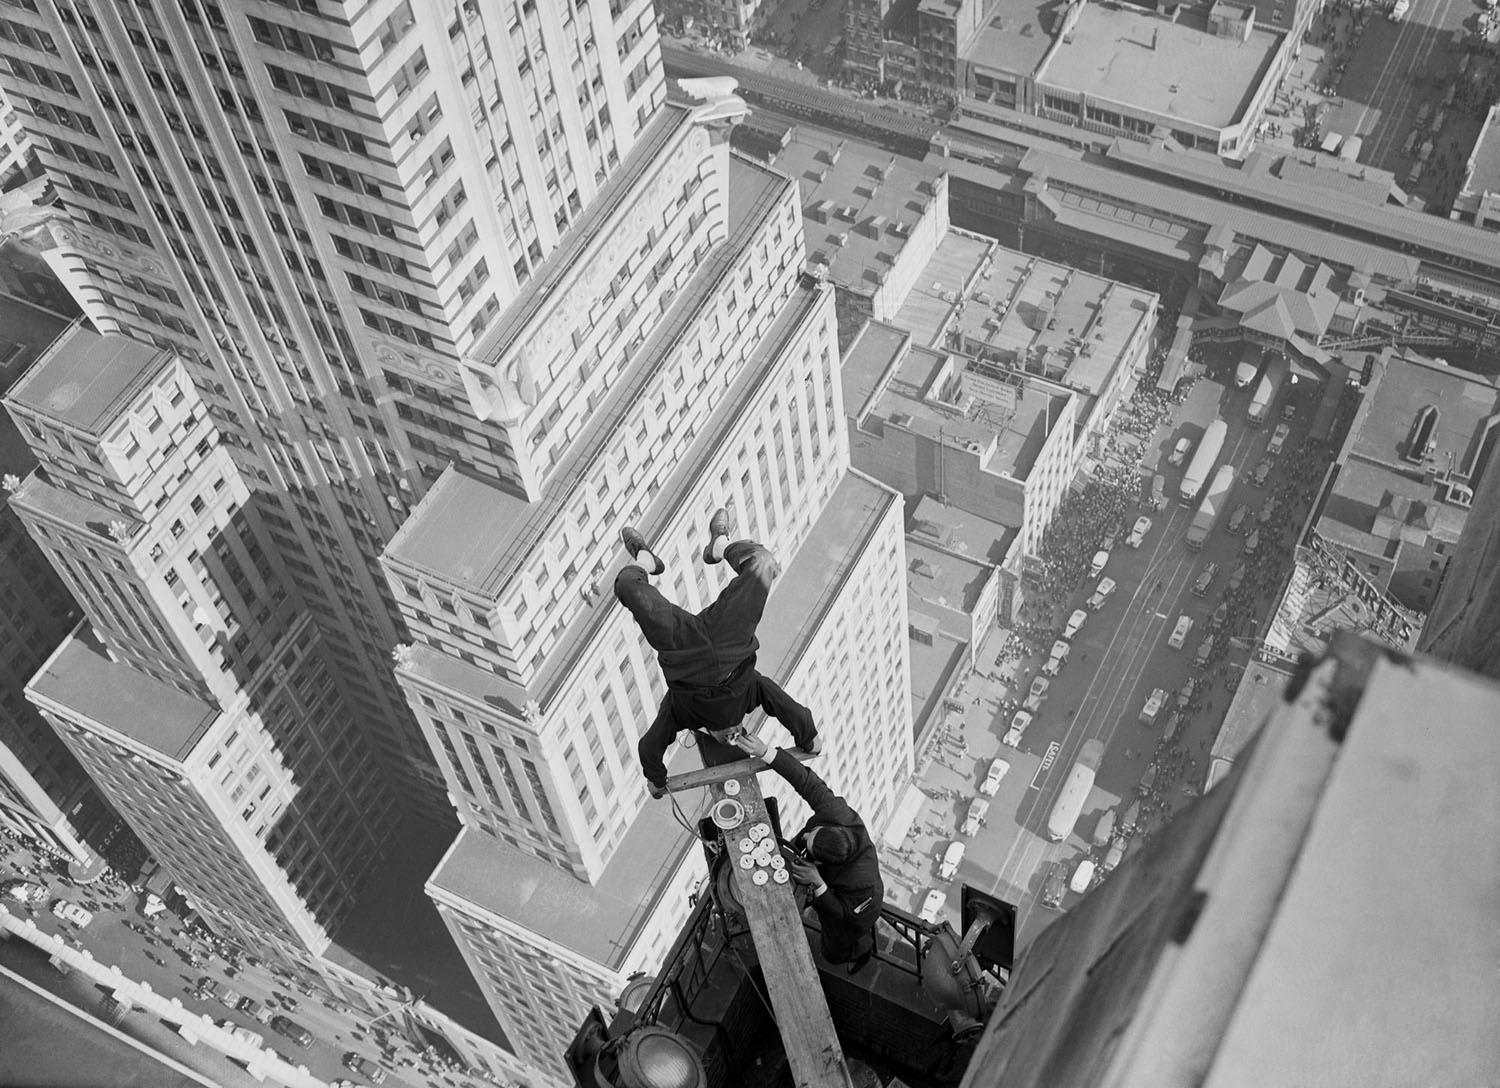 On October 13, 1939, Alvin "Shipwreck" Kelly celebrated National Donut Dunking Week by standing on his head on a pole atop the Chanin Building in Manhattan and eating 13 donuts that had been dunked in coffee.